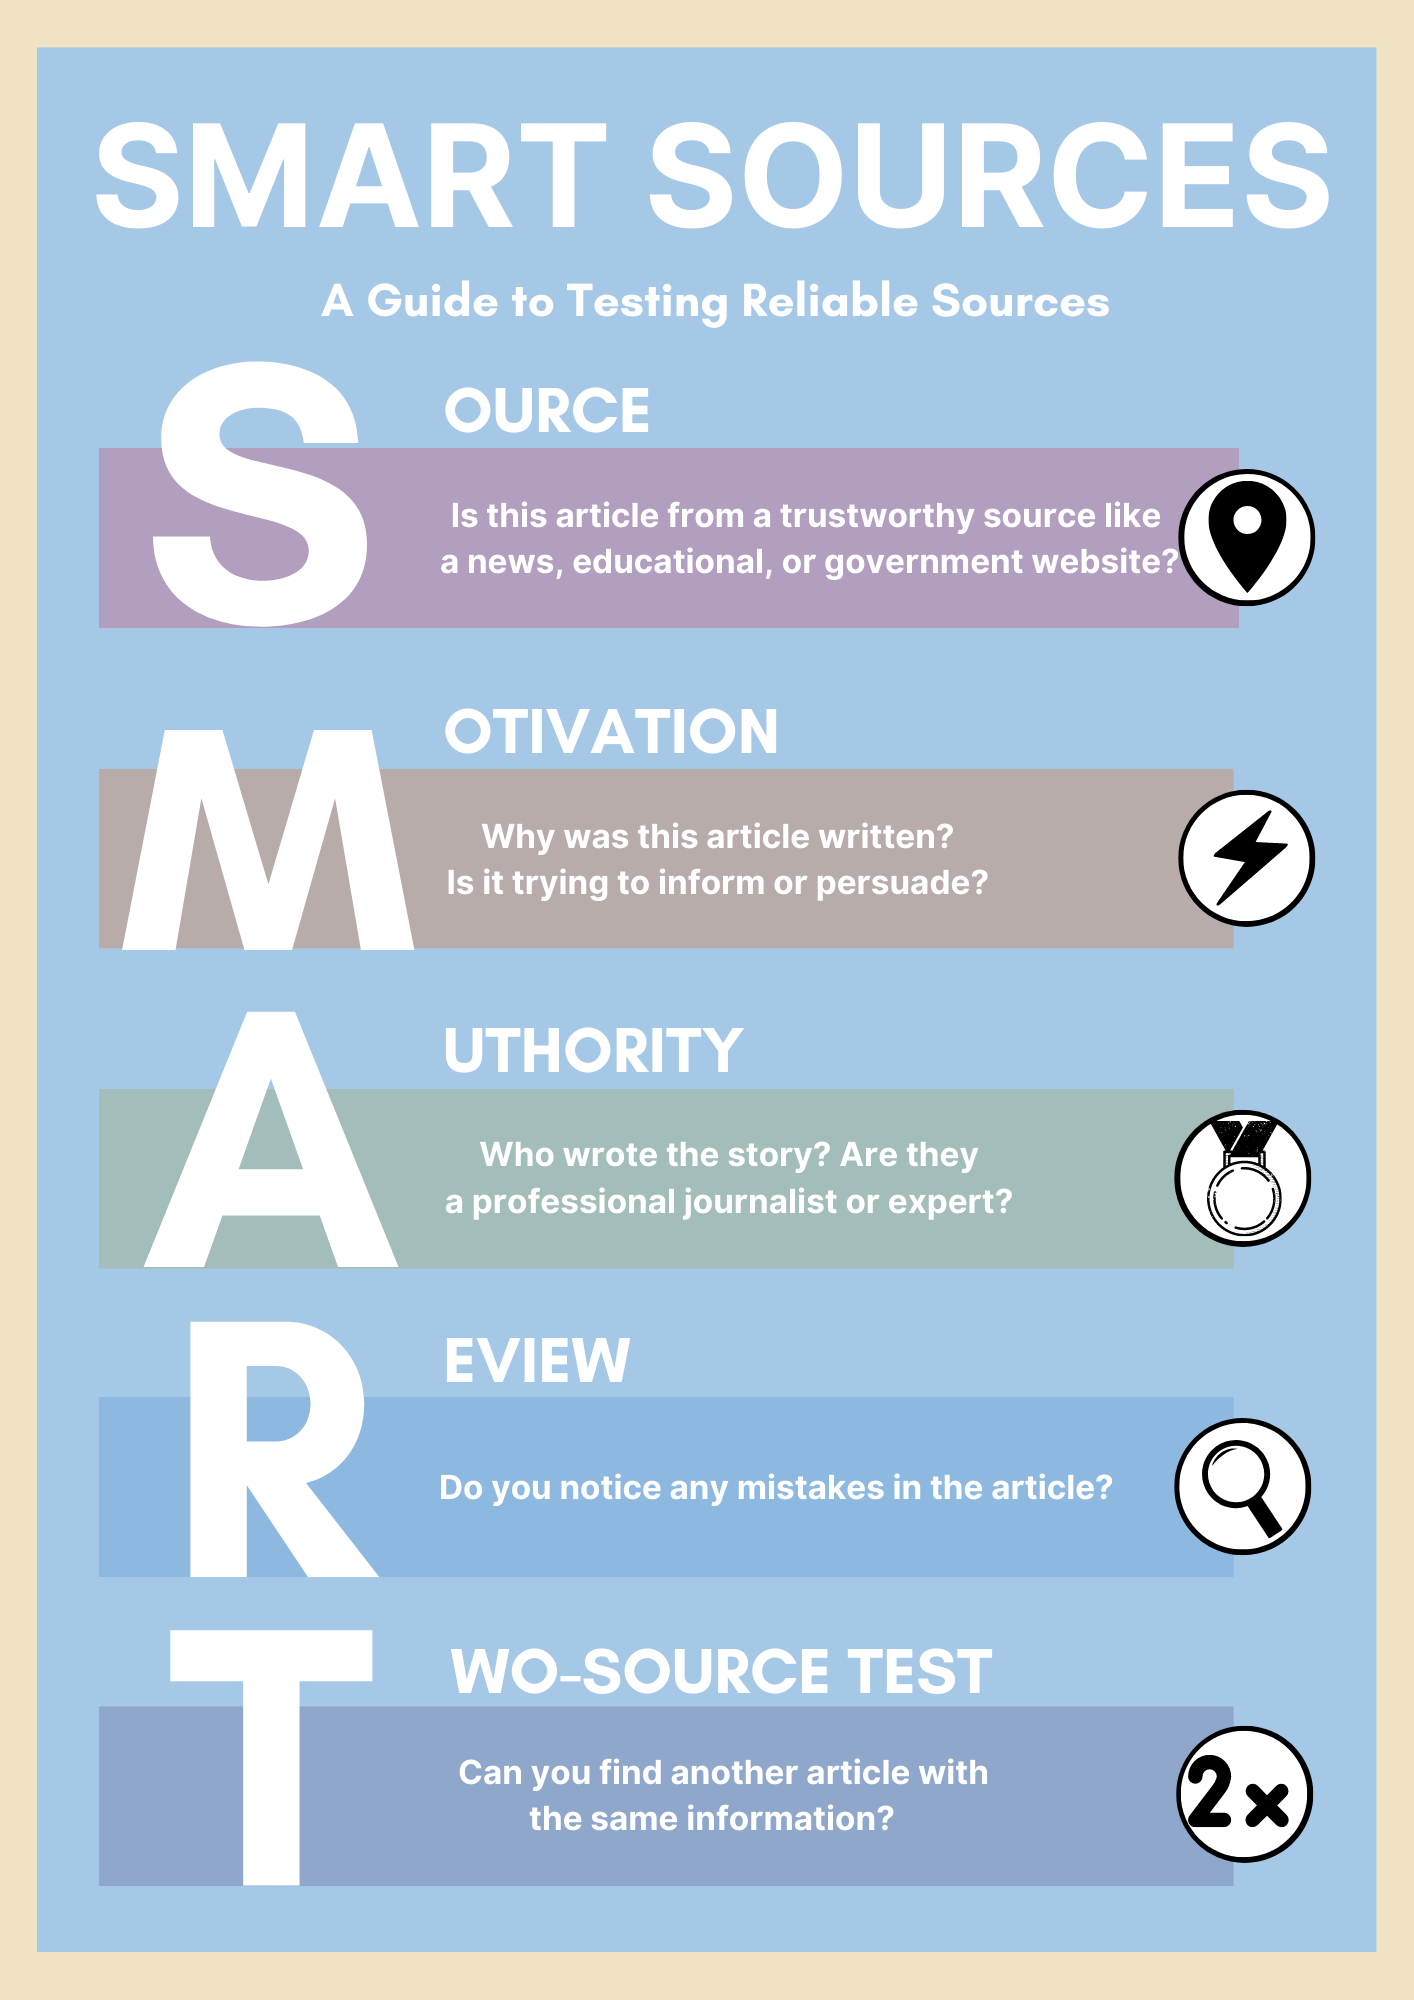 SMART Sources Criteria: Source, Motivation, Authority, Review, Two-Source Test